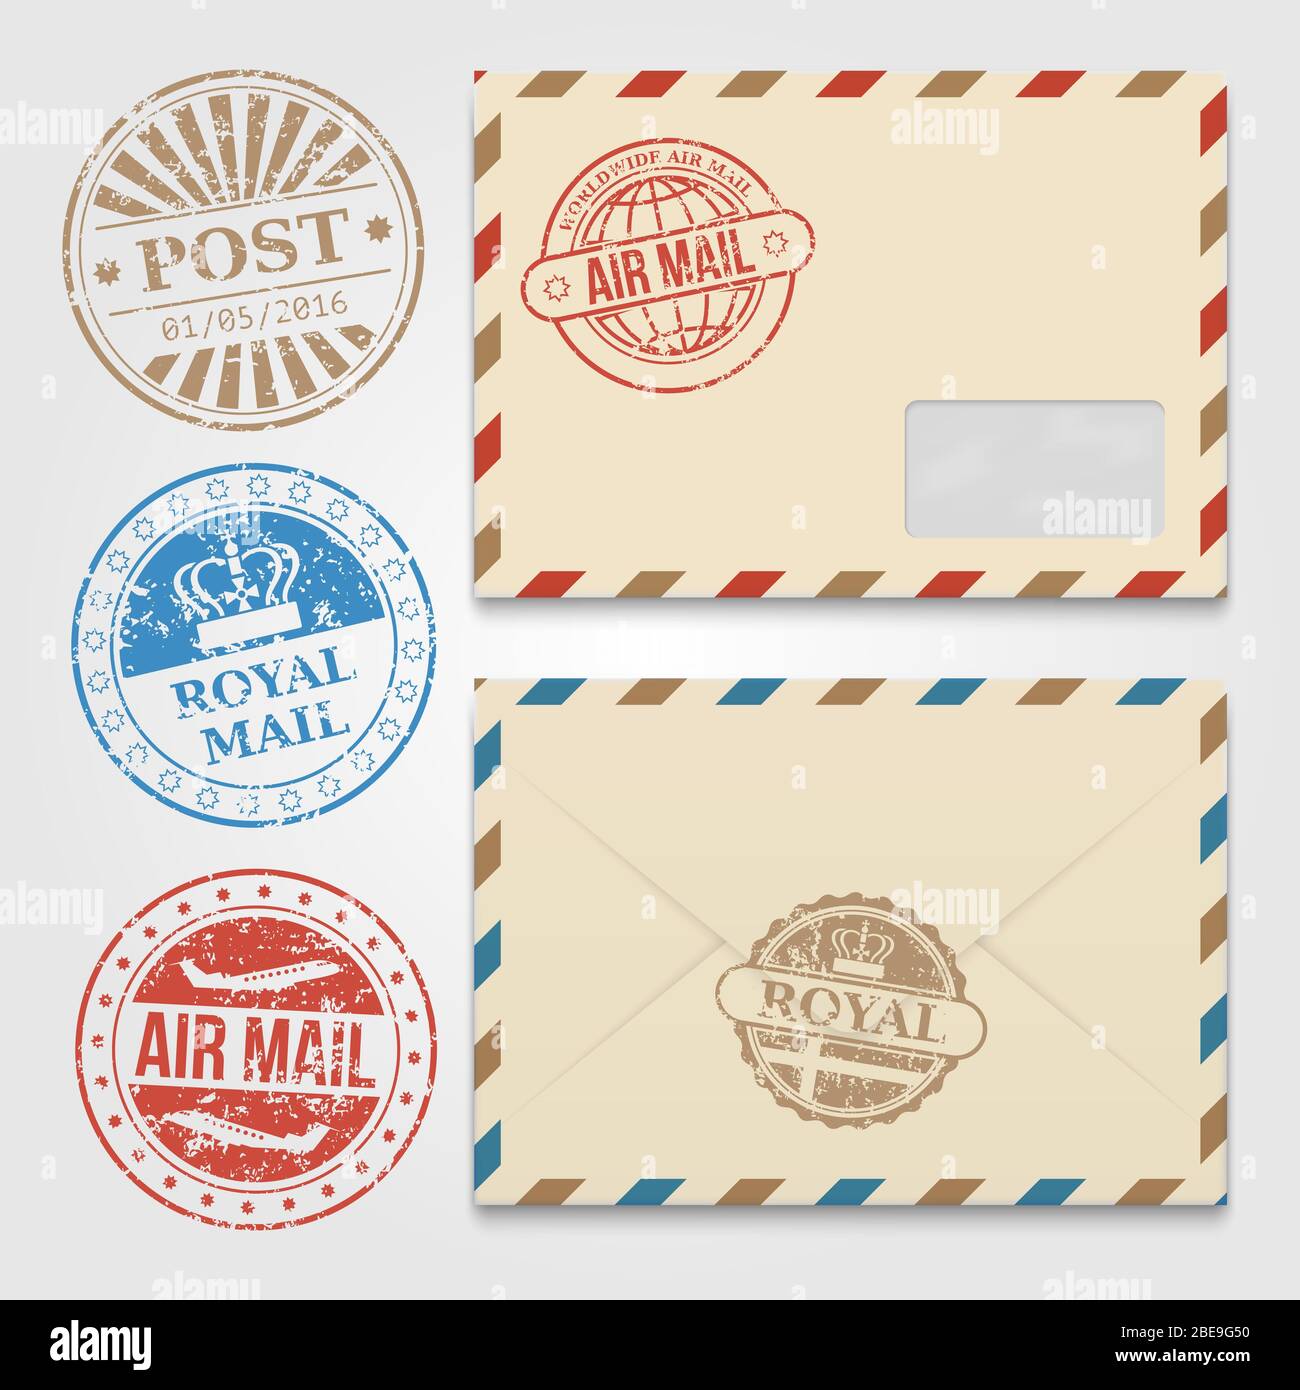 Vintage envelopes template with grunge postal stamps. Envelope with stamp air mail. Vector illustration Stock Vector